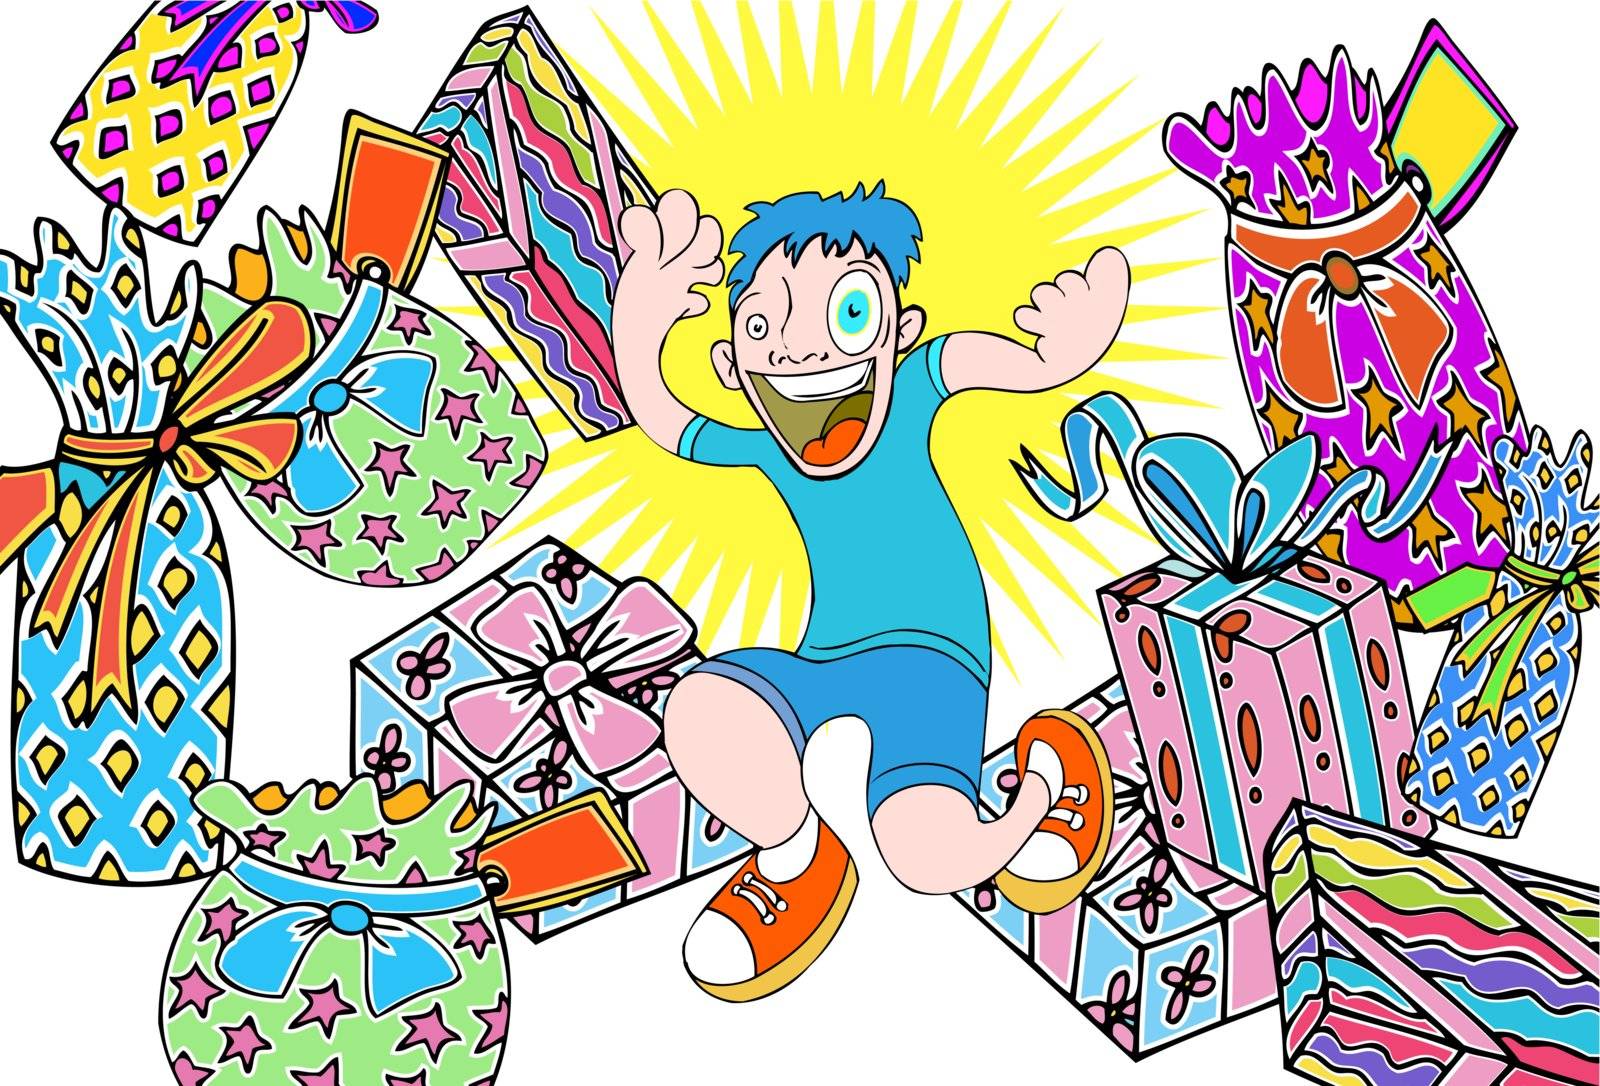 Kid with Presents by cteconsulting